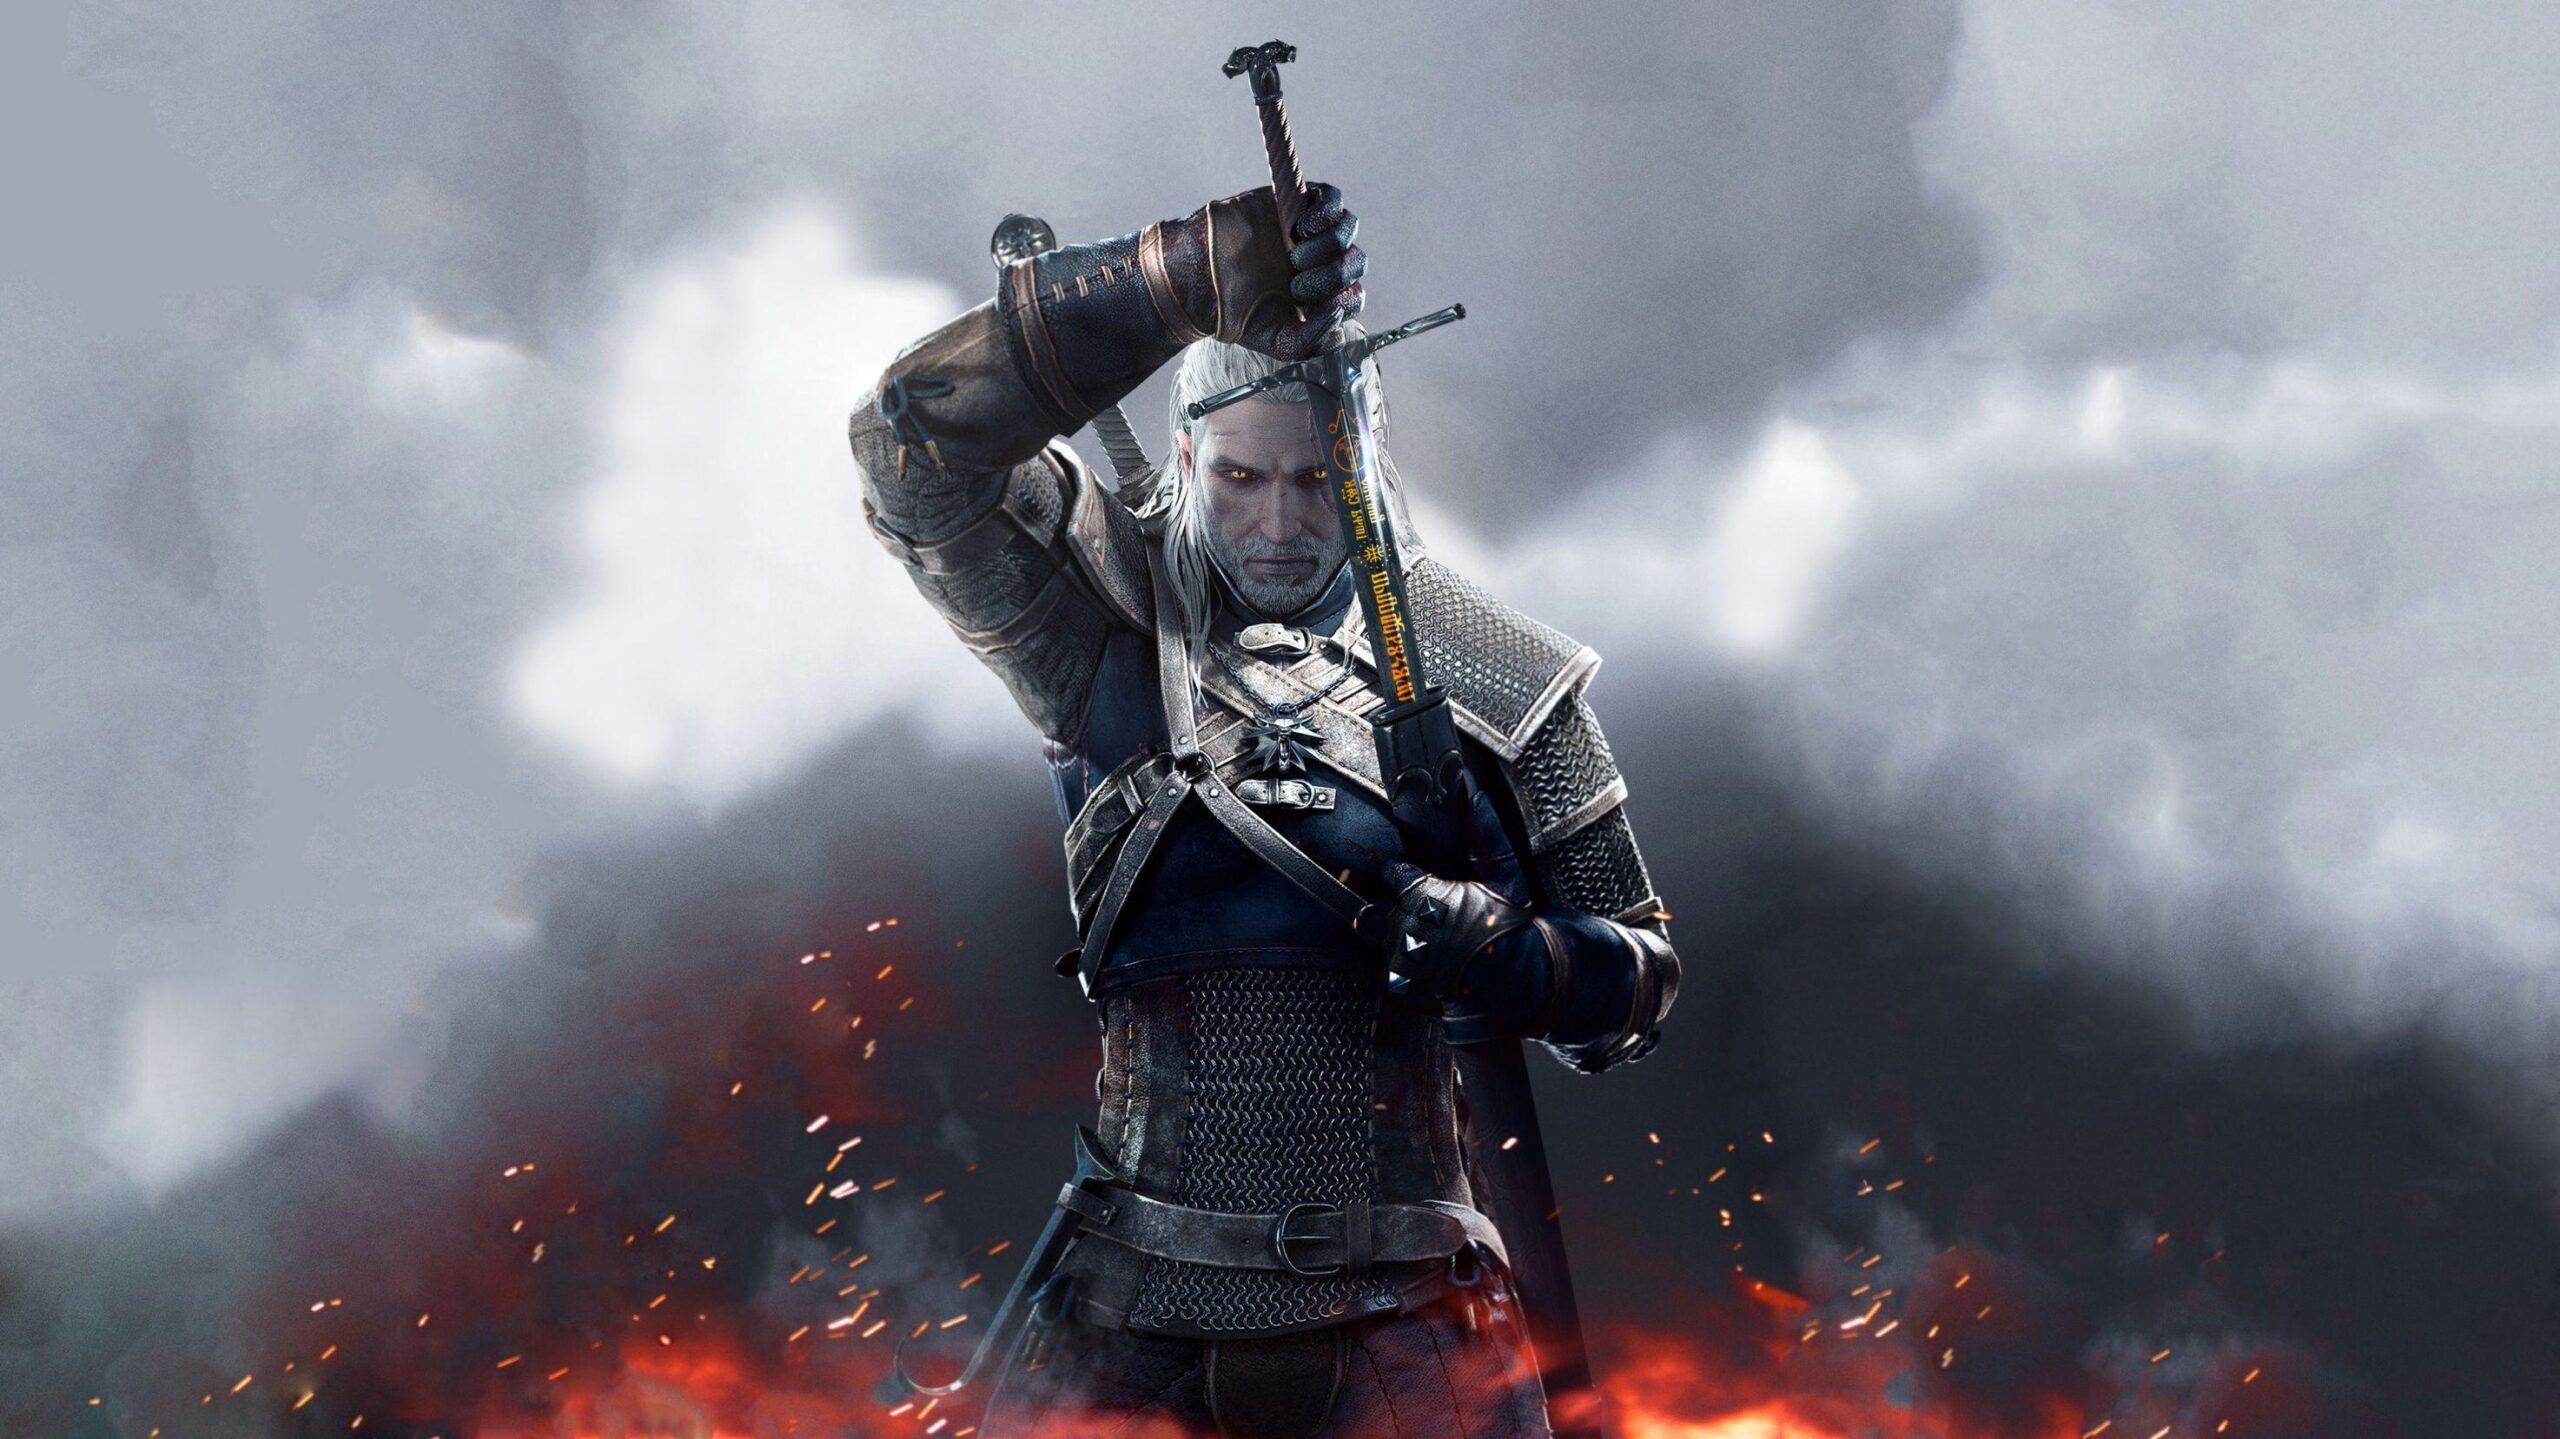 The Witcher Wild Hunt Wallpaper Geralt 2K wallpapers and backgrounds